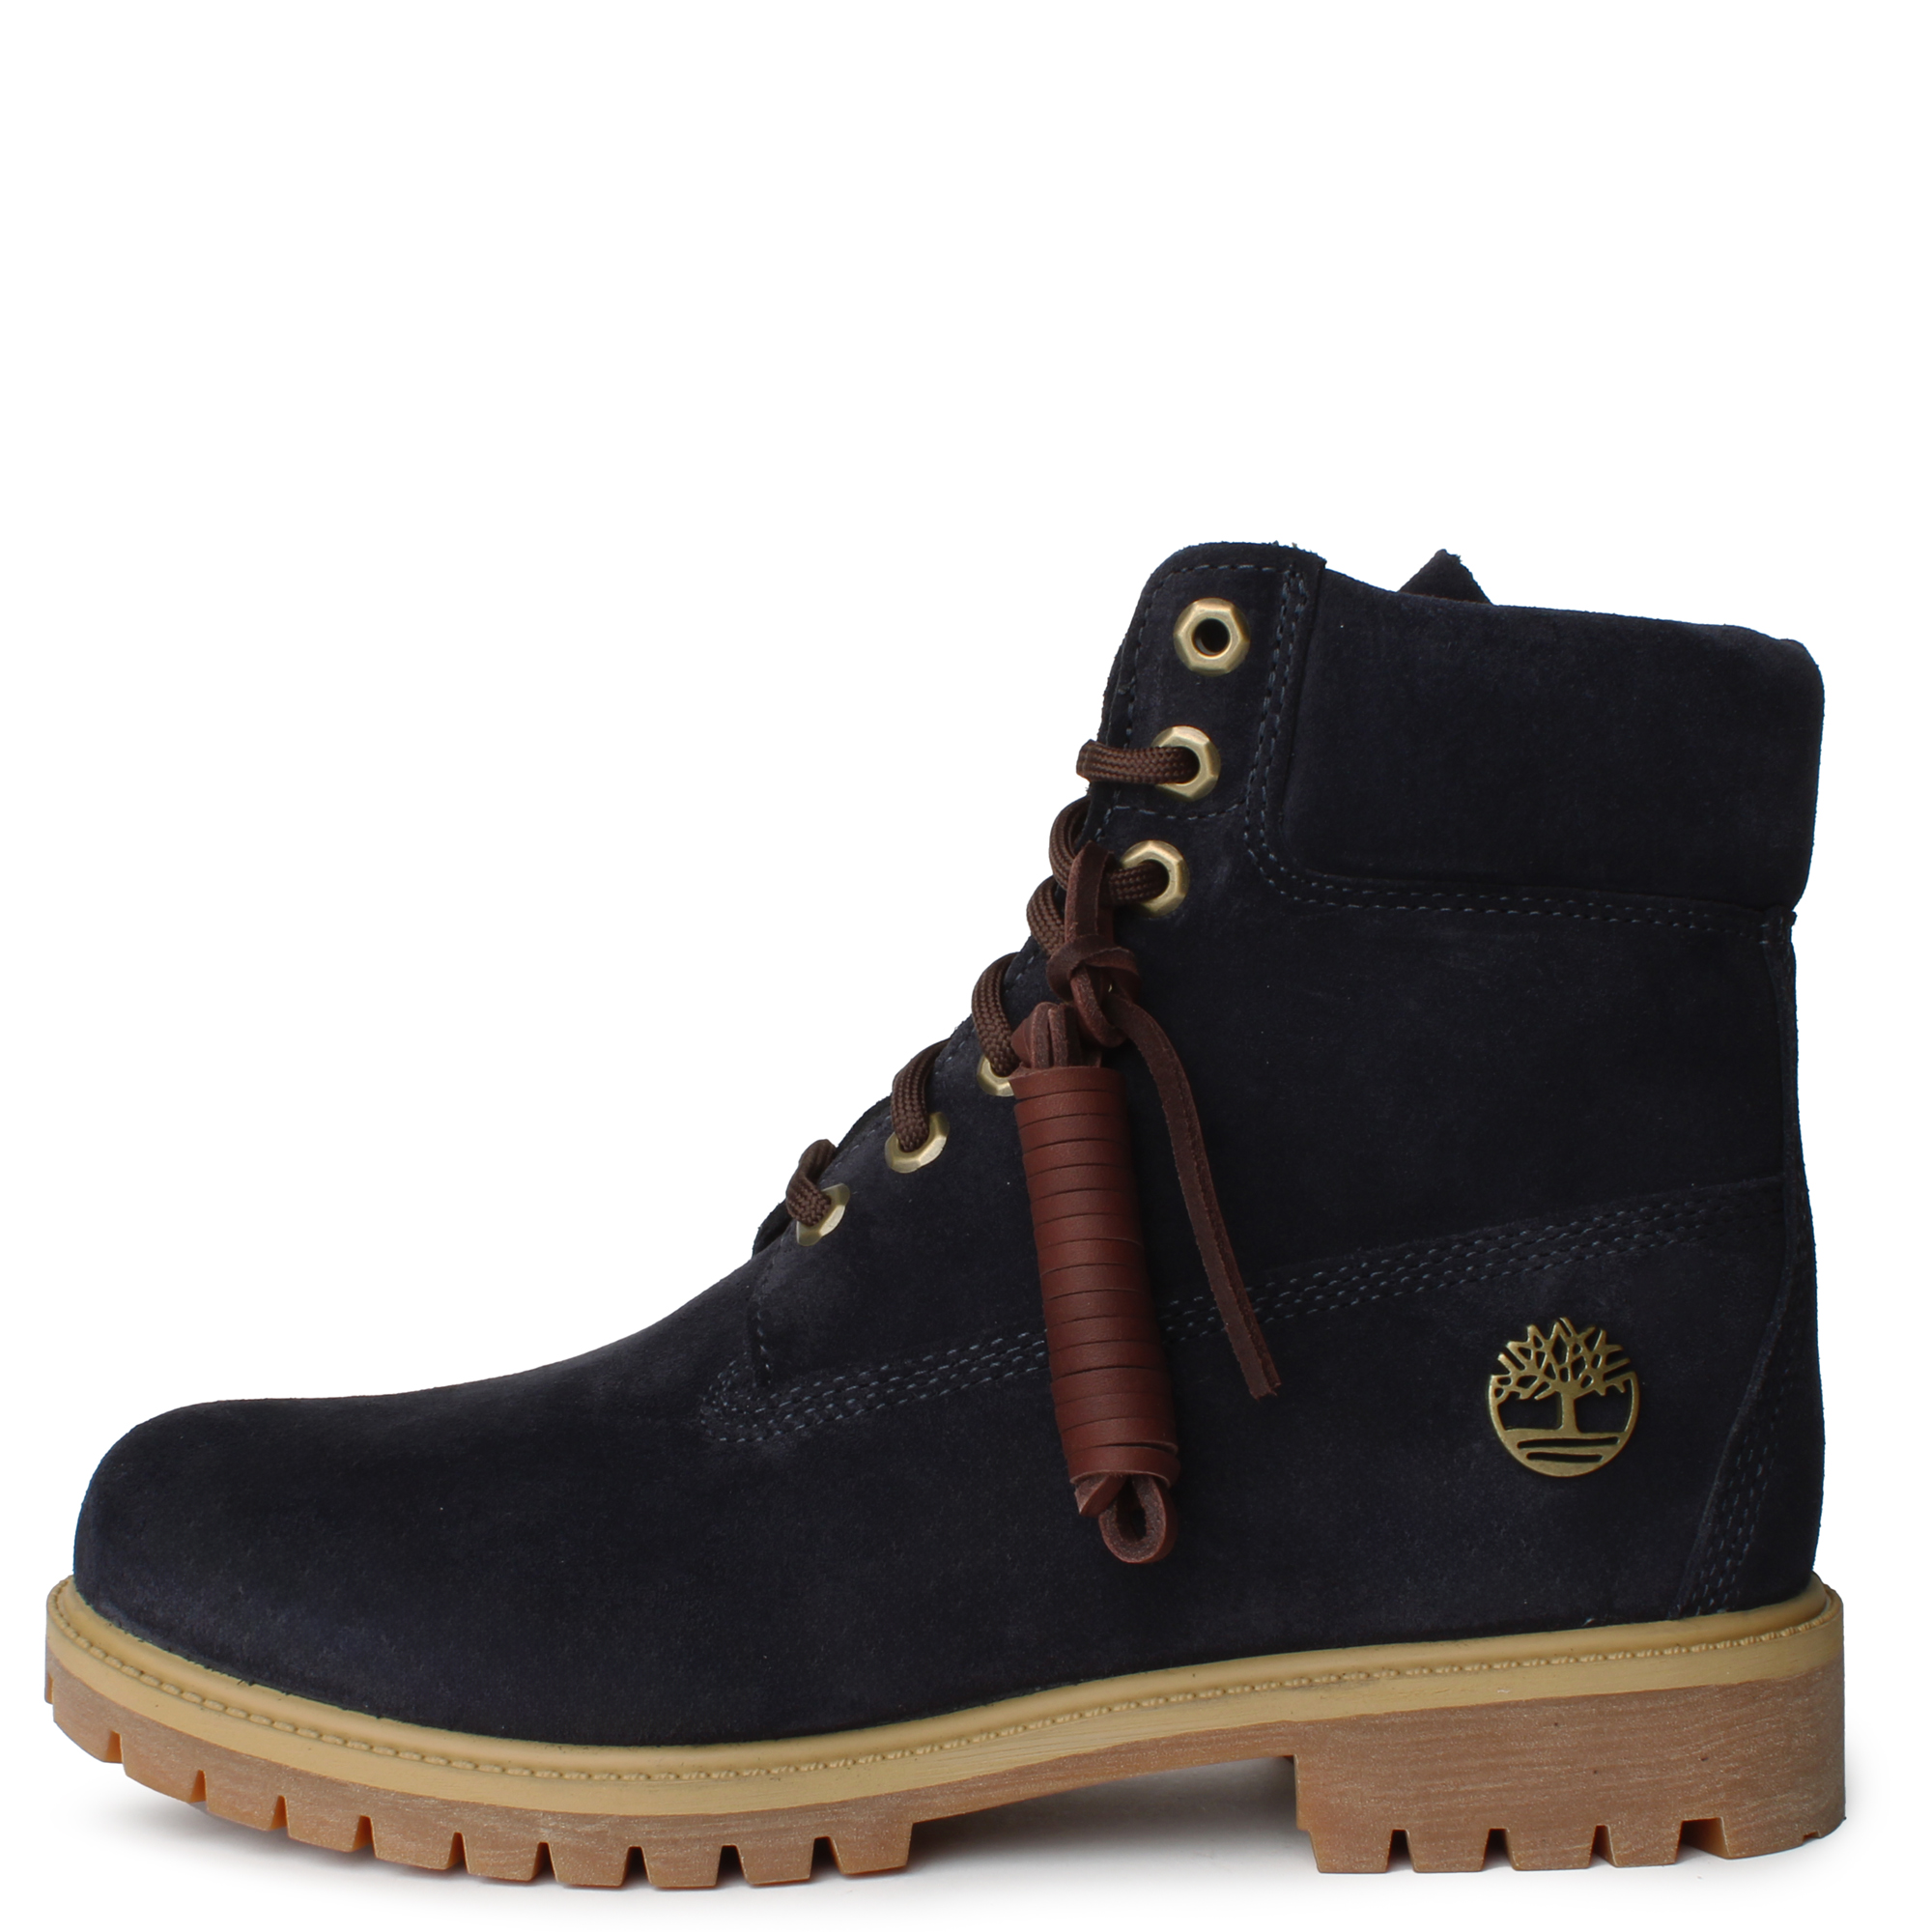 TIMBERLAND Heritage 6-Inch Boot TB0A6821EP3 - Shiekh